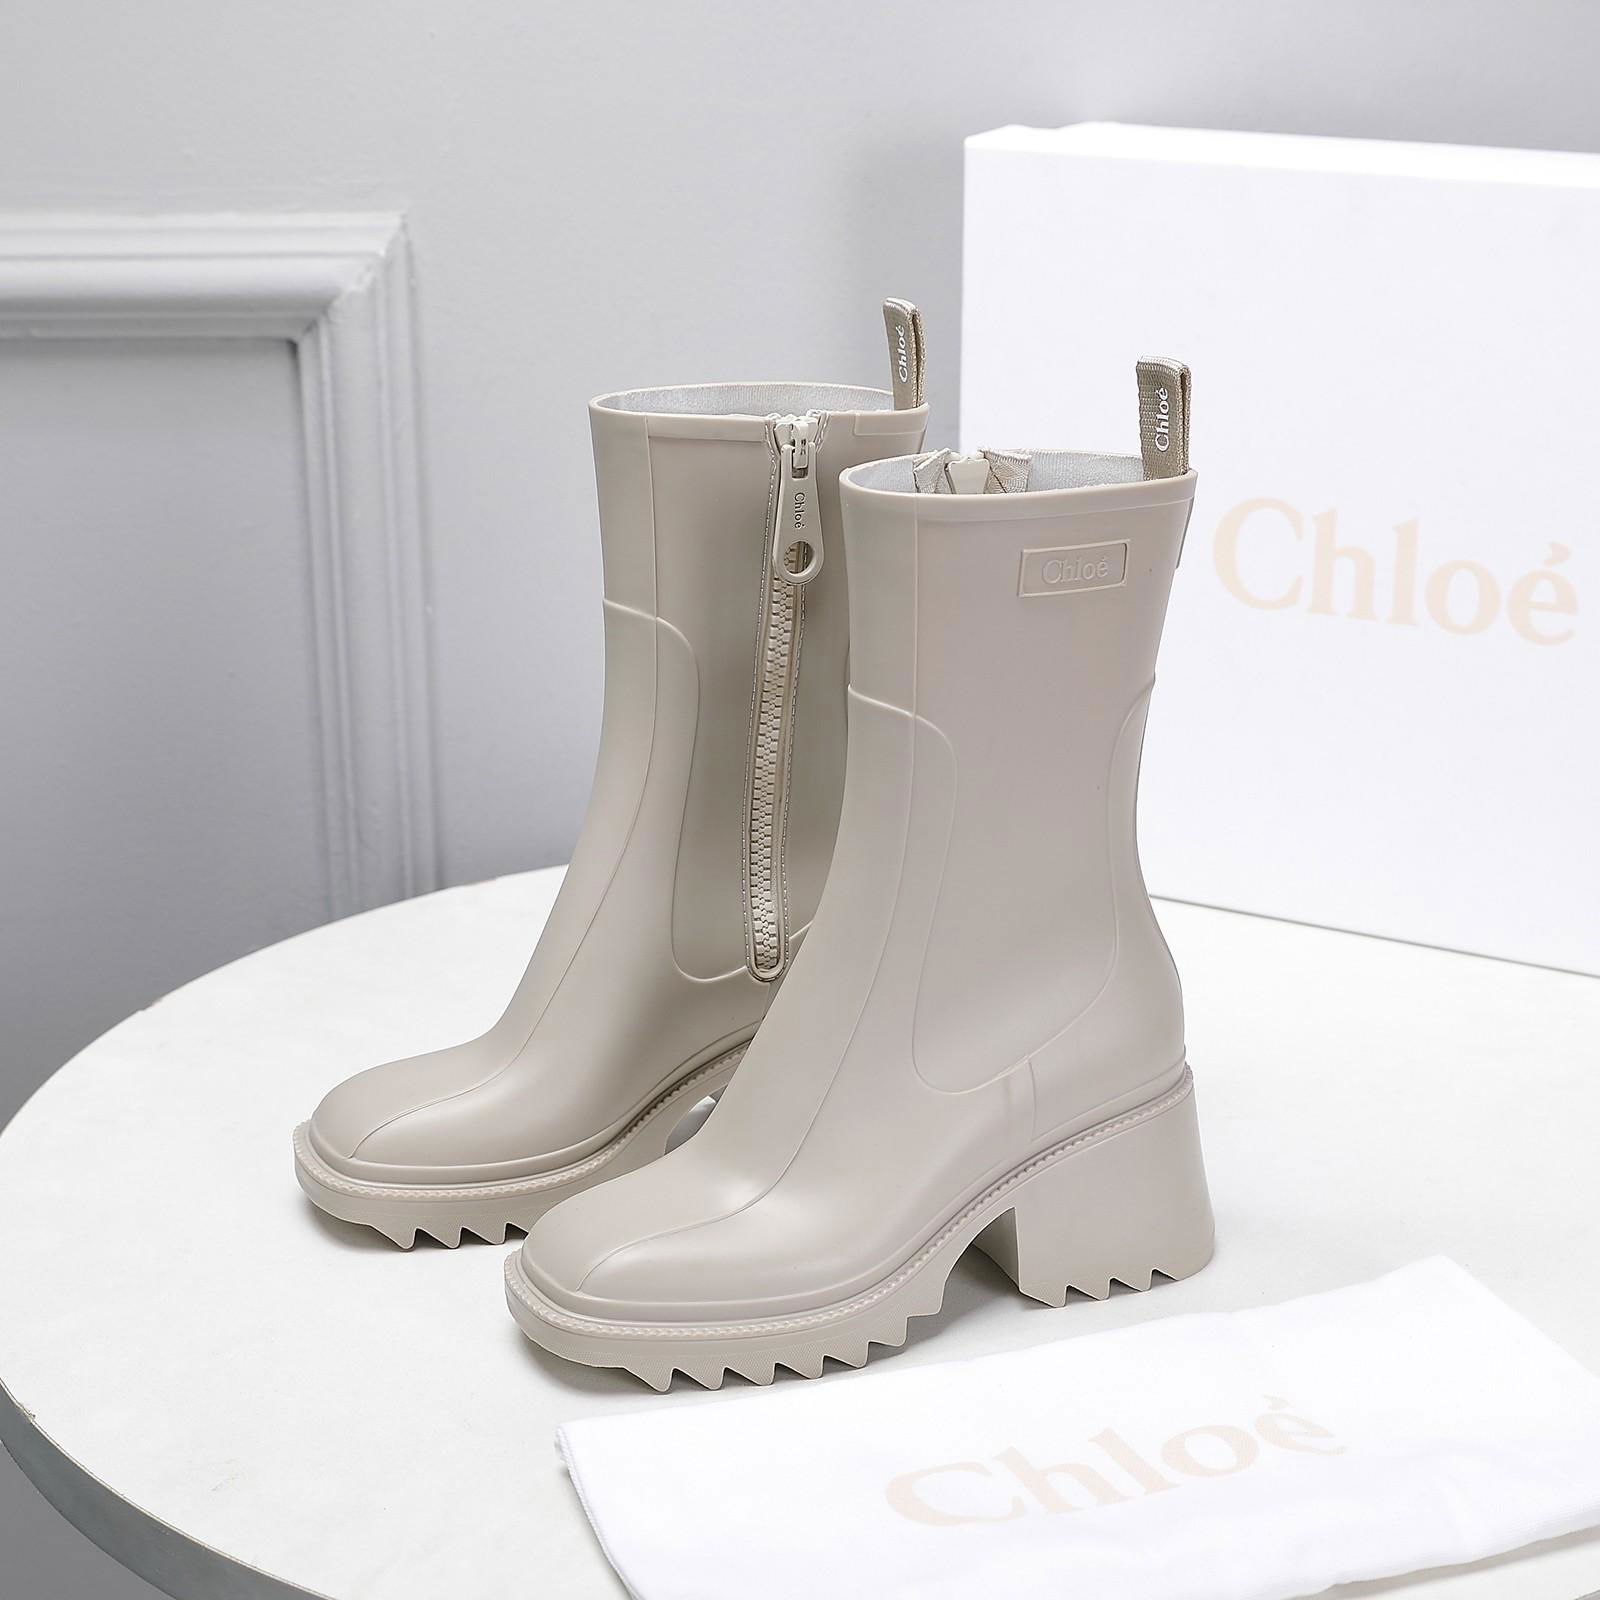       Betty logo embossed rubber boots       rain boots 5